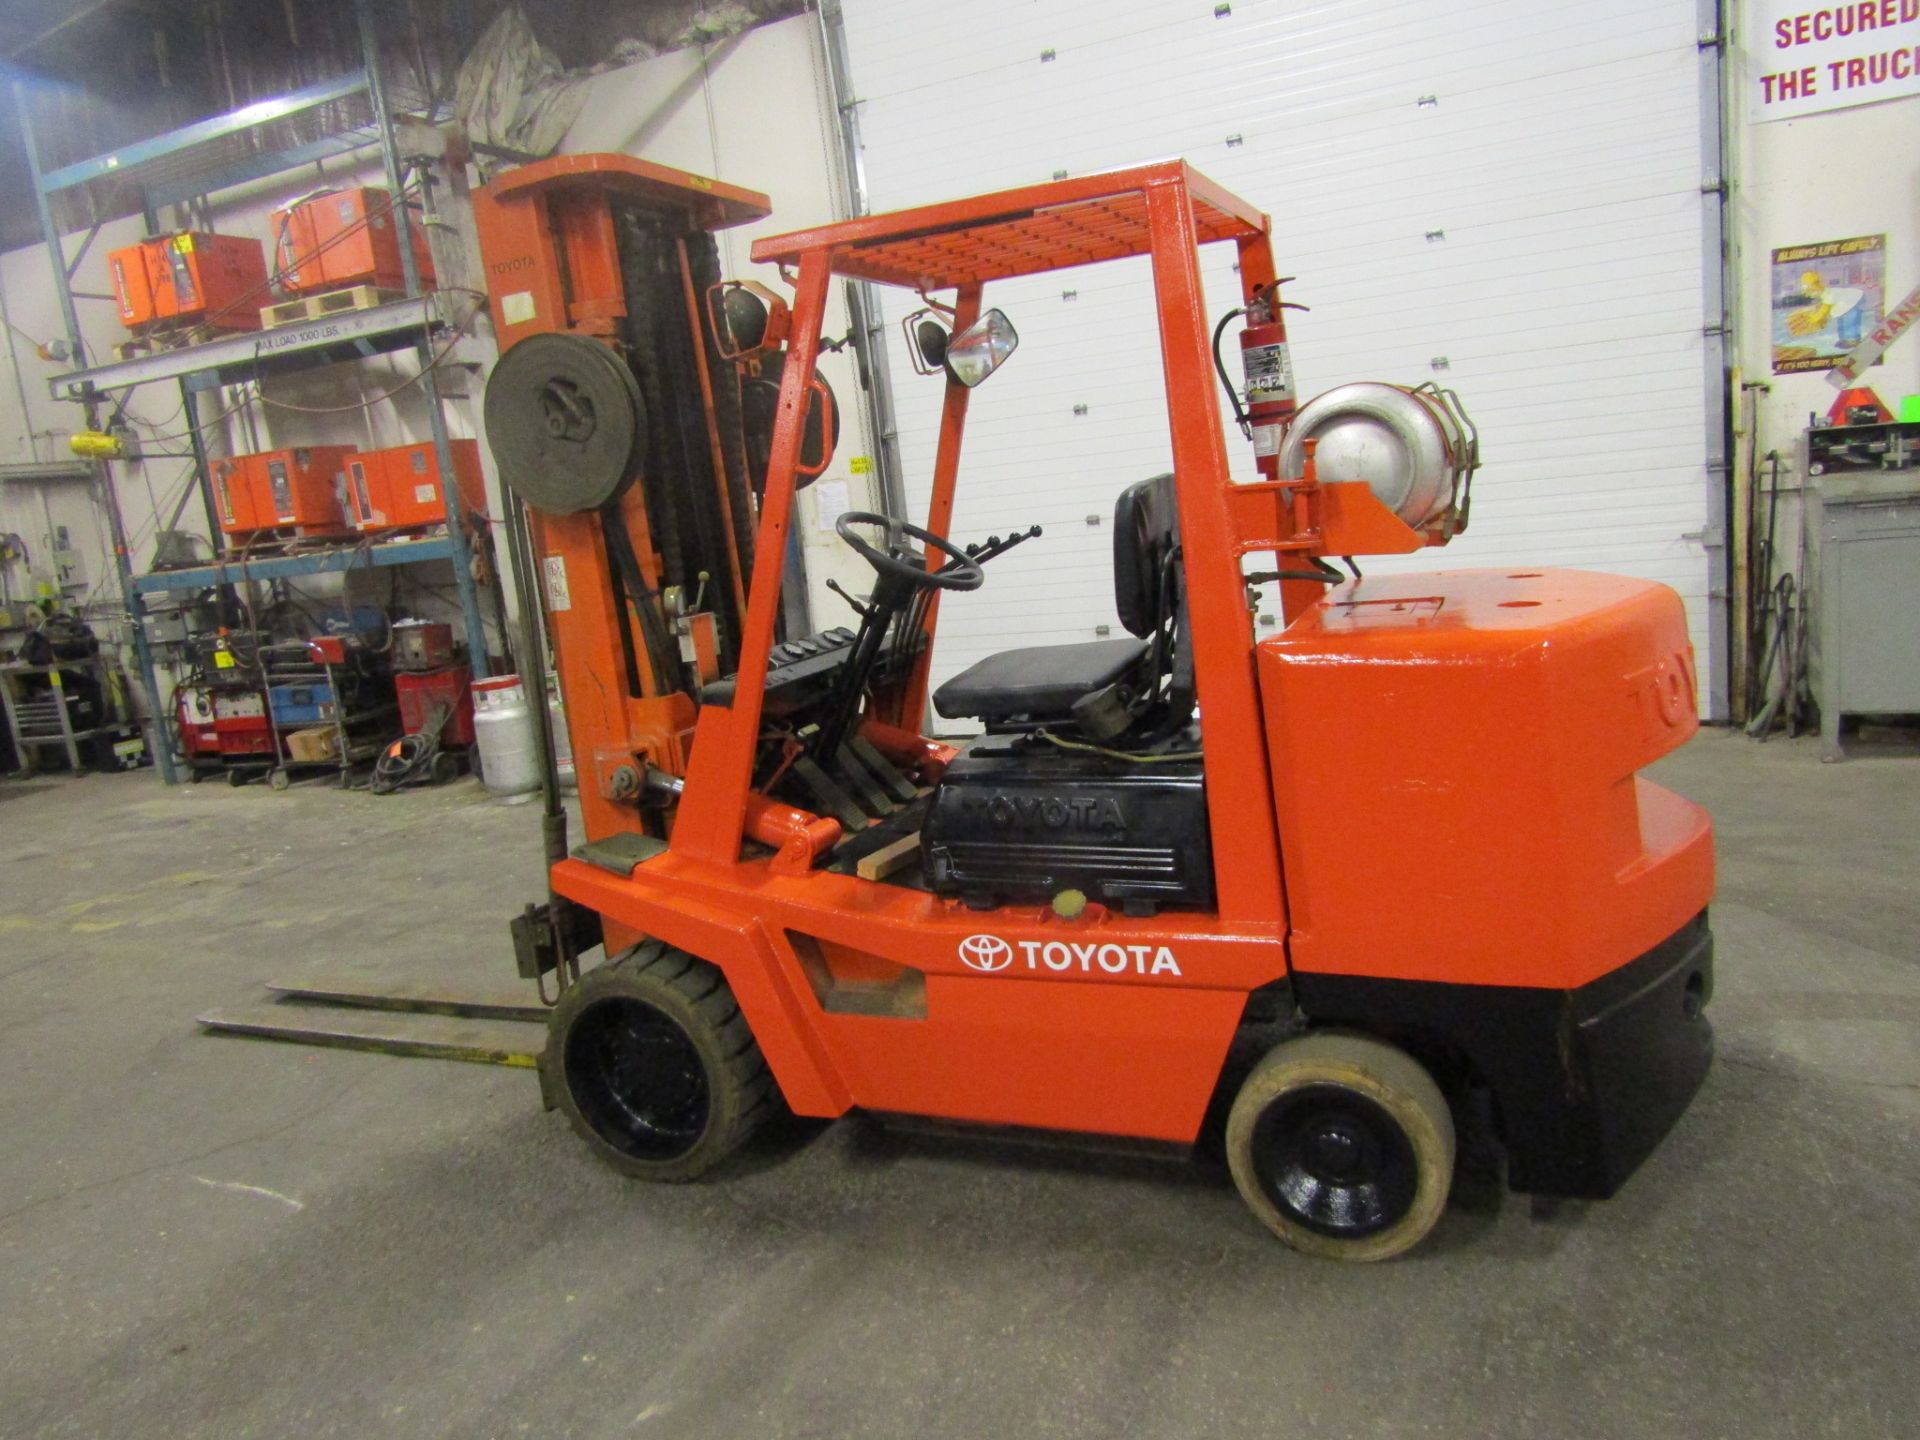 Toyota 10000lbs Capacity Forklift - LPG (propane) with 6' forks with 3-stage mast (no propane tank